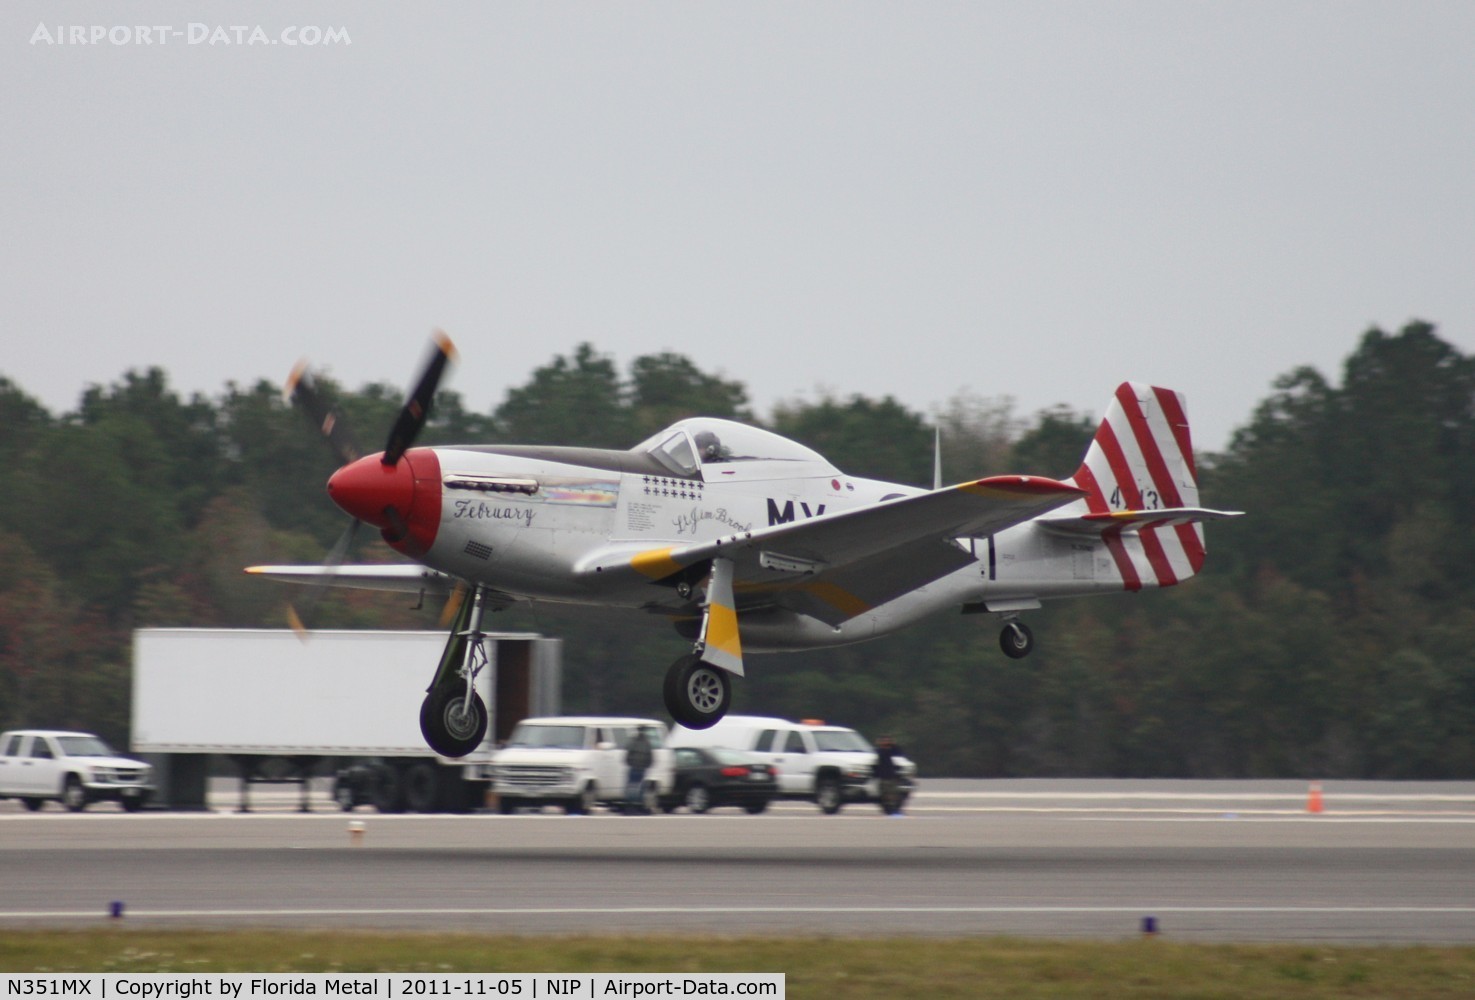 N351MX, 1944 North American P-51D Mustang C/N 122-40931 (44-74391), February is a name appropriate for this plane today, since it felt like February